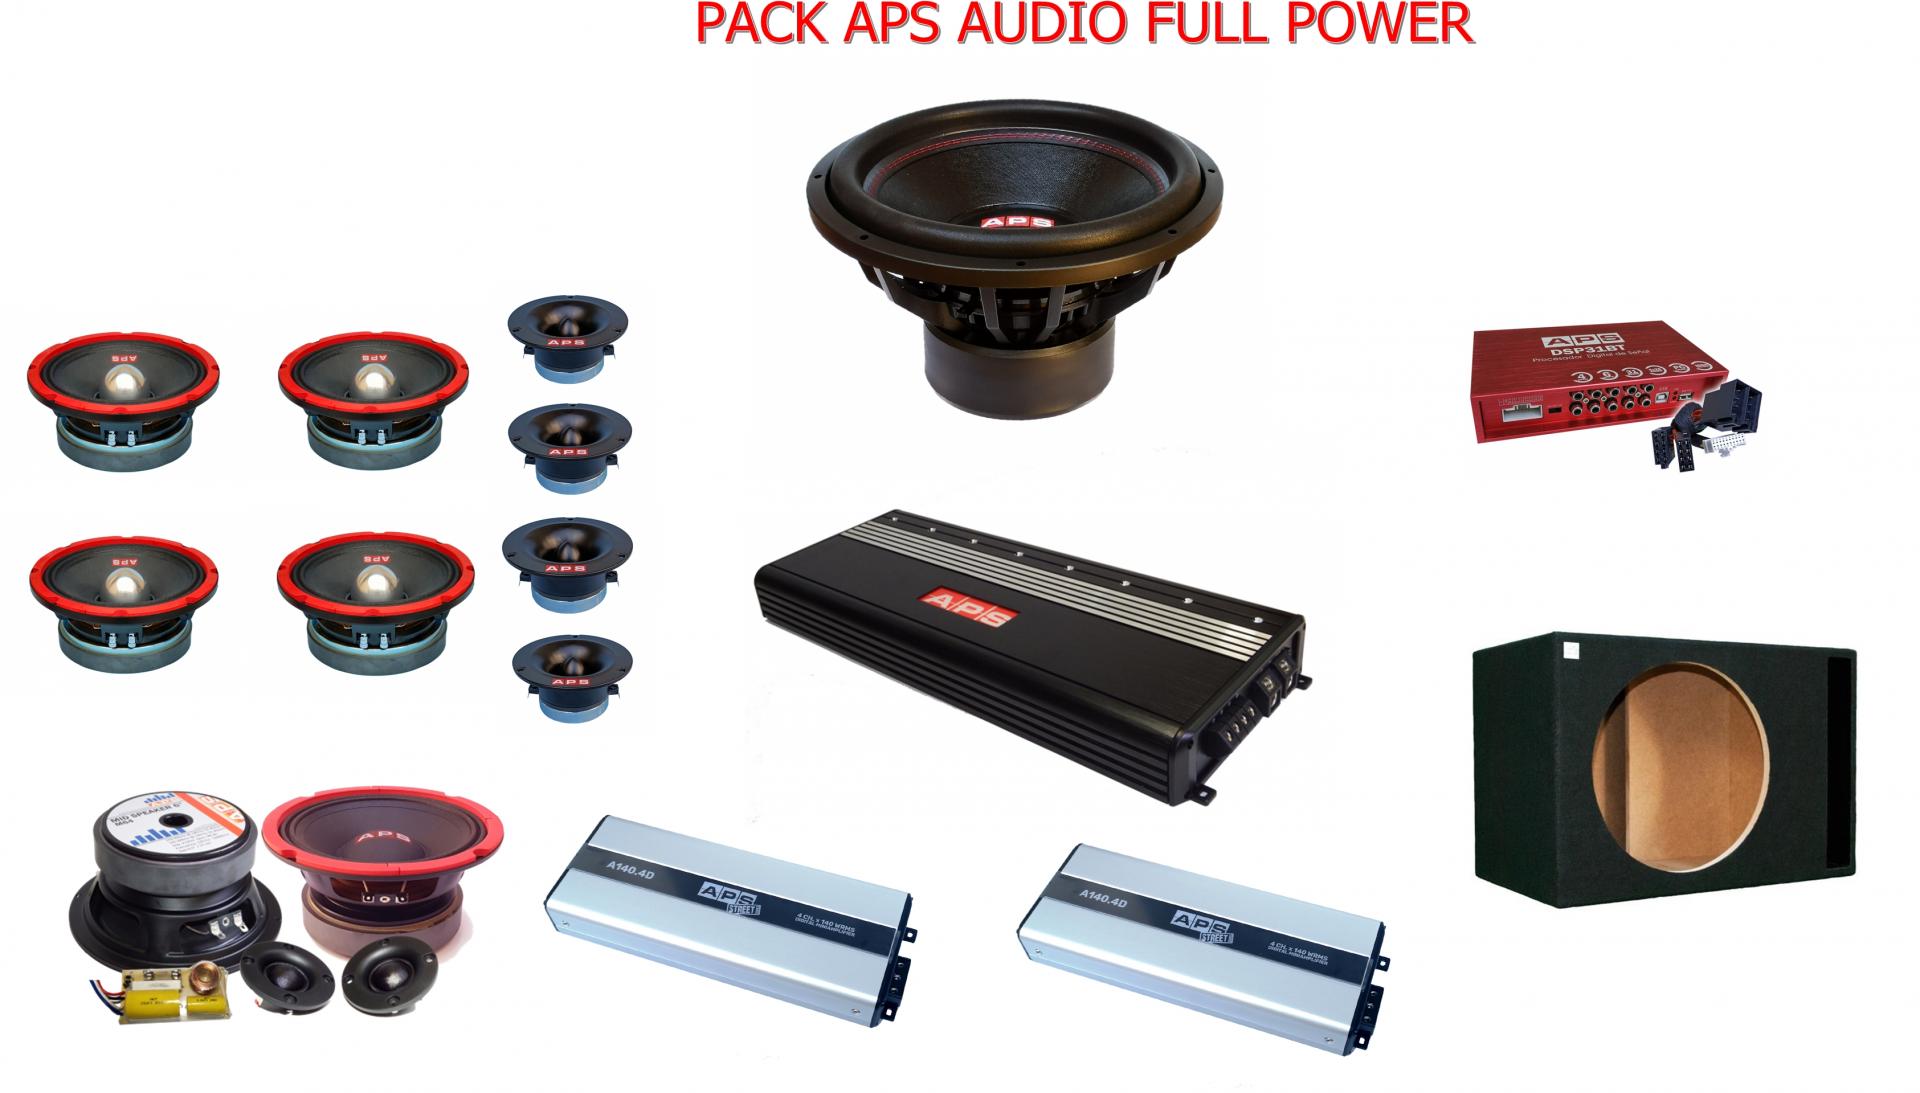 PACK APS AUDIO EXTREME